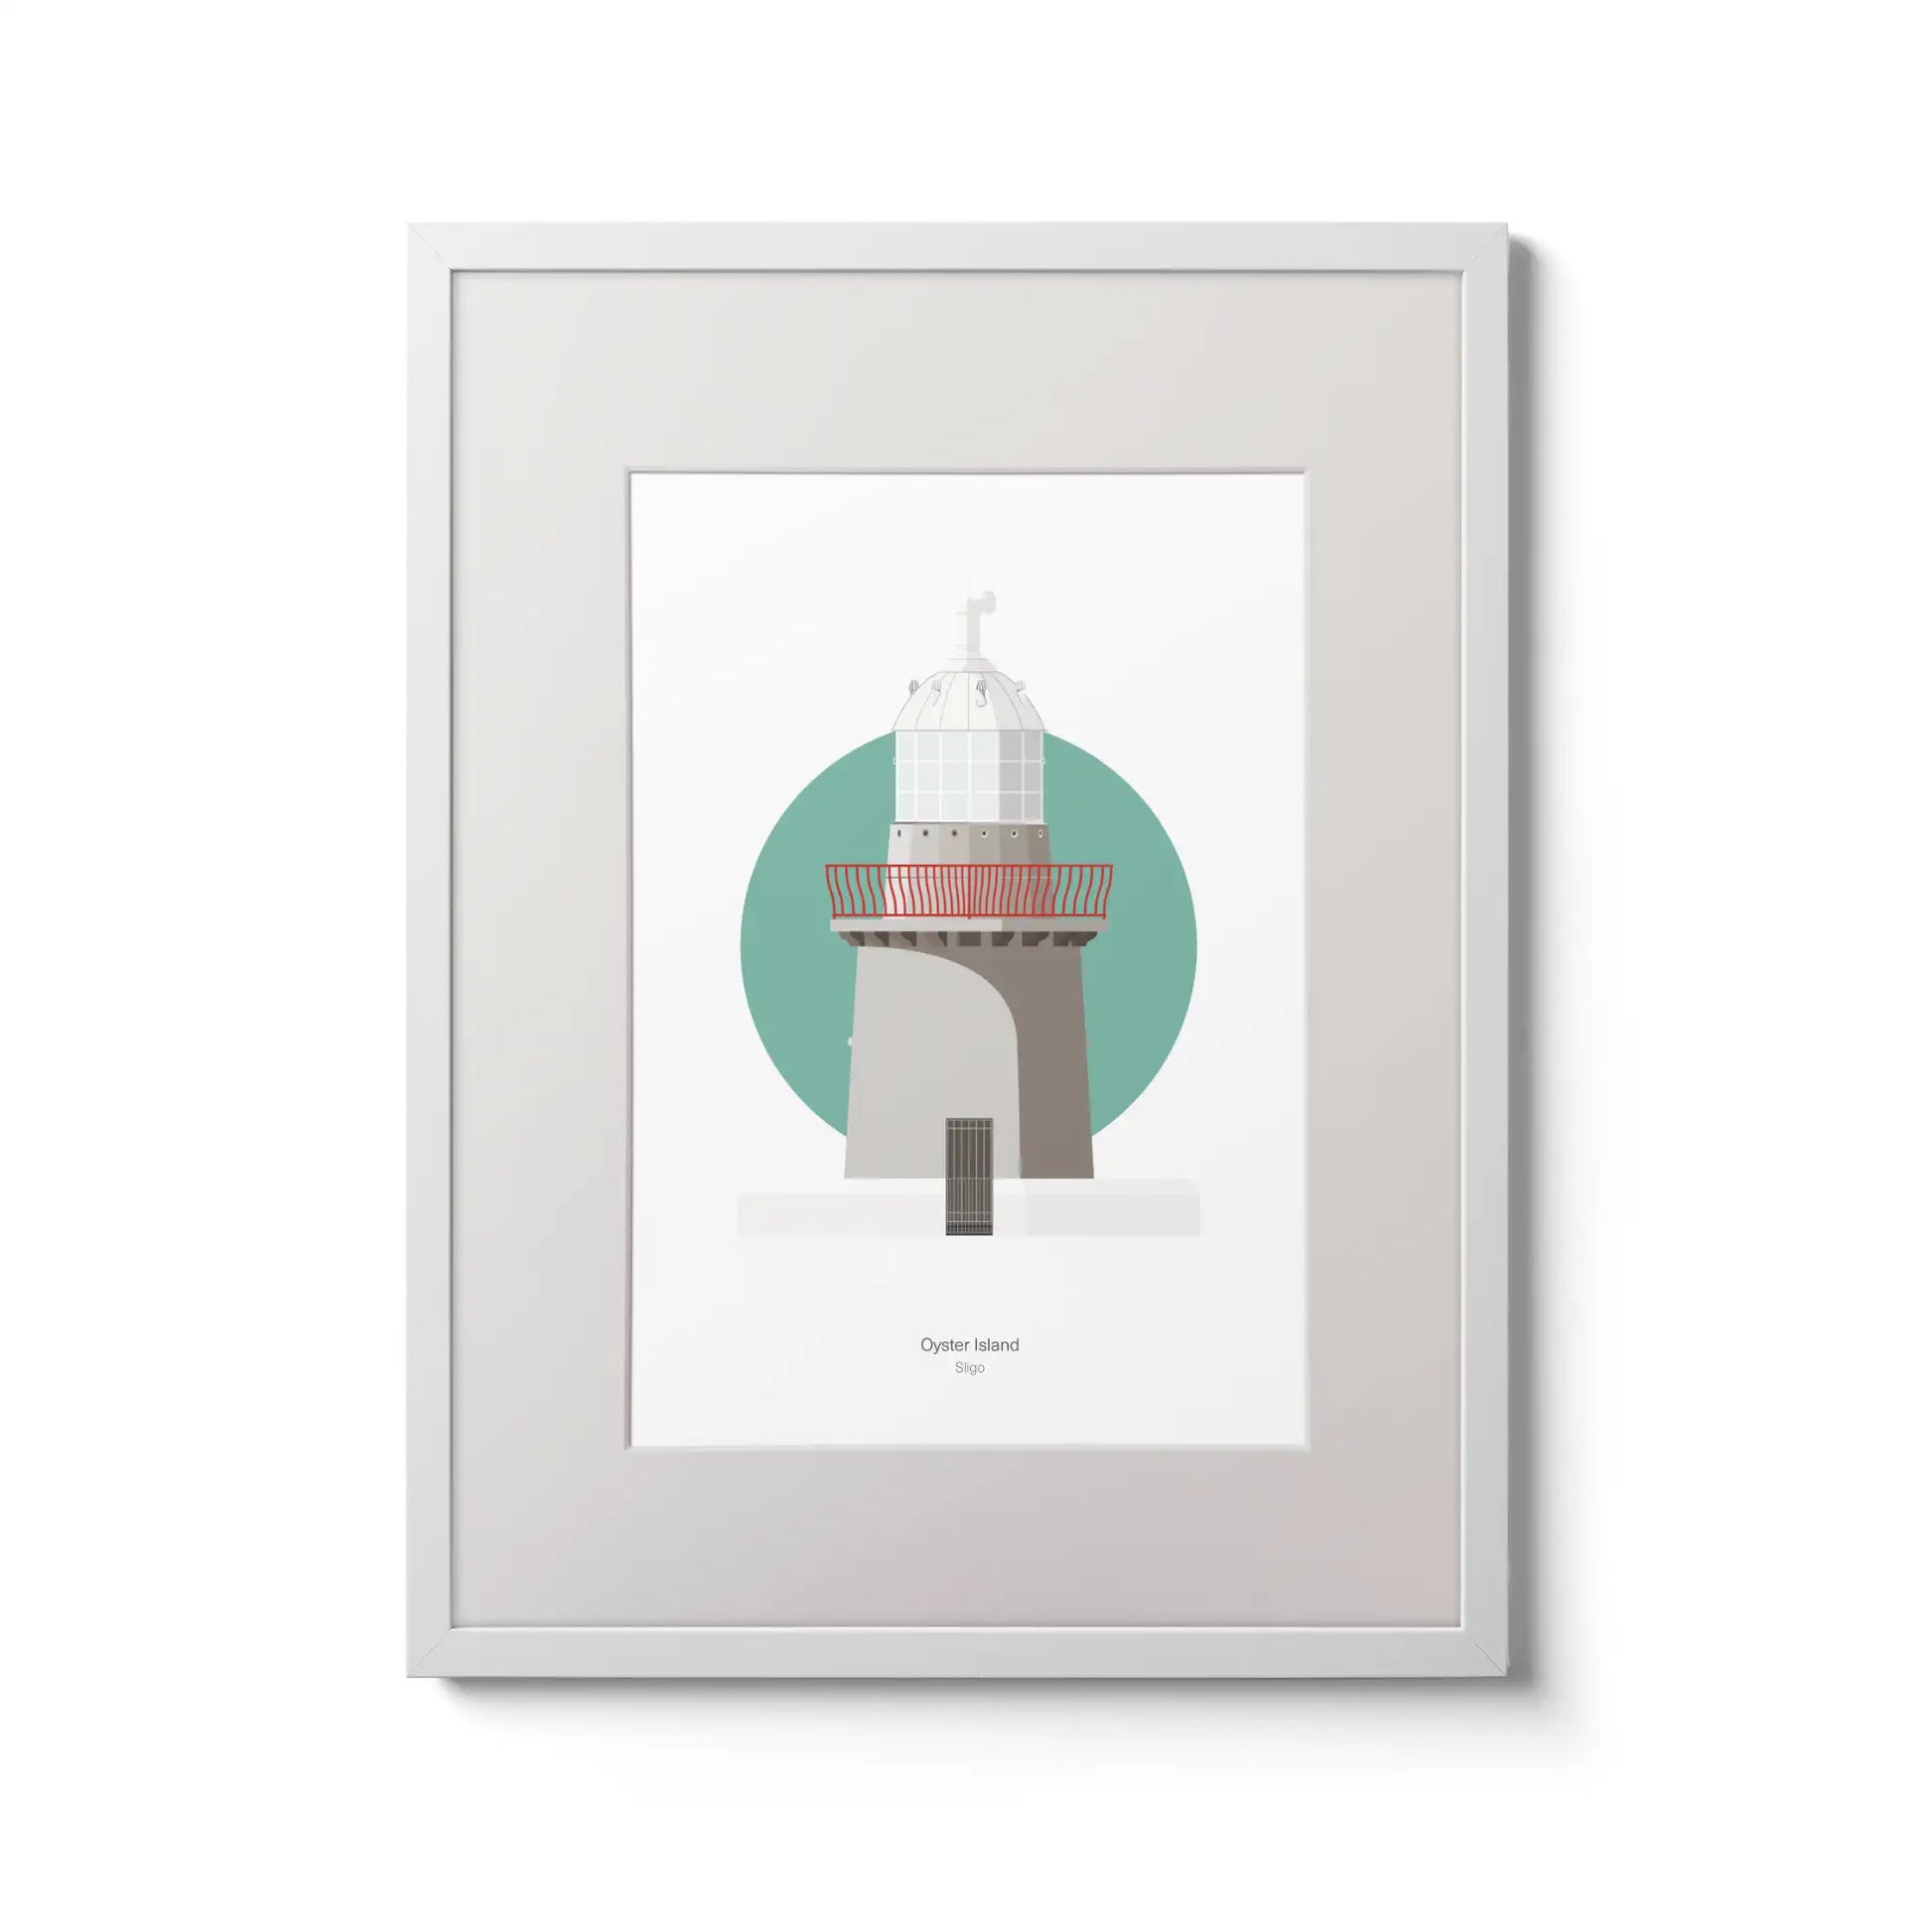 Illustration of Oyster Island lighthouse on a white background inside light blue square,  in a white frame measuring 30x40cm.